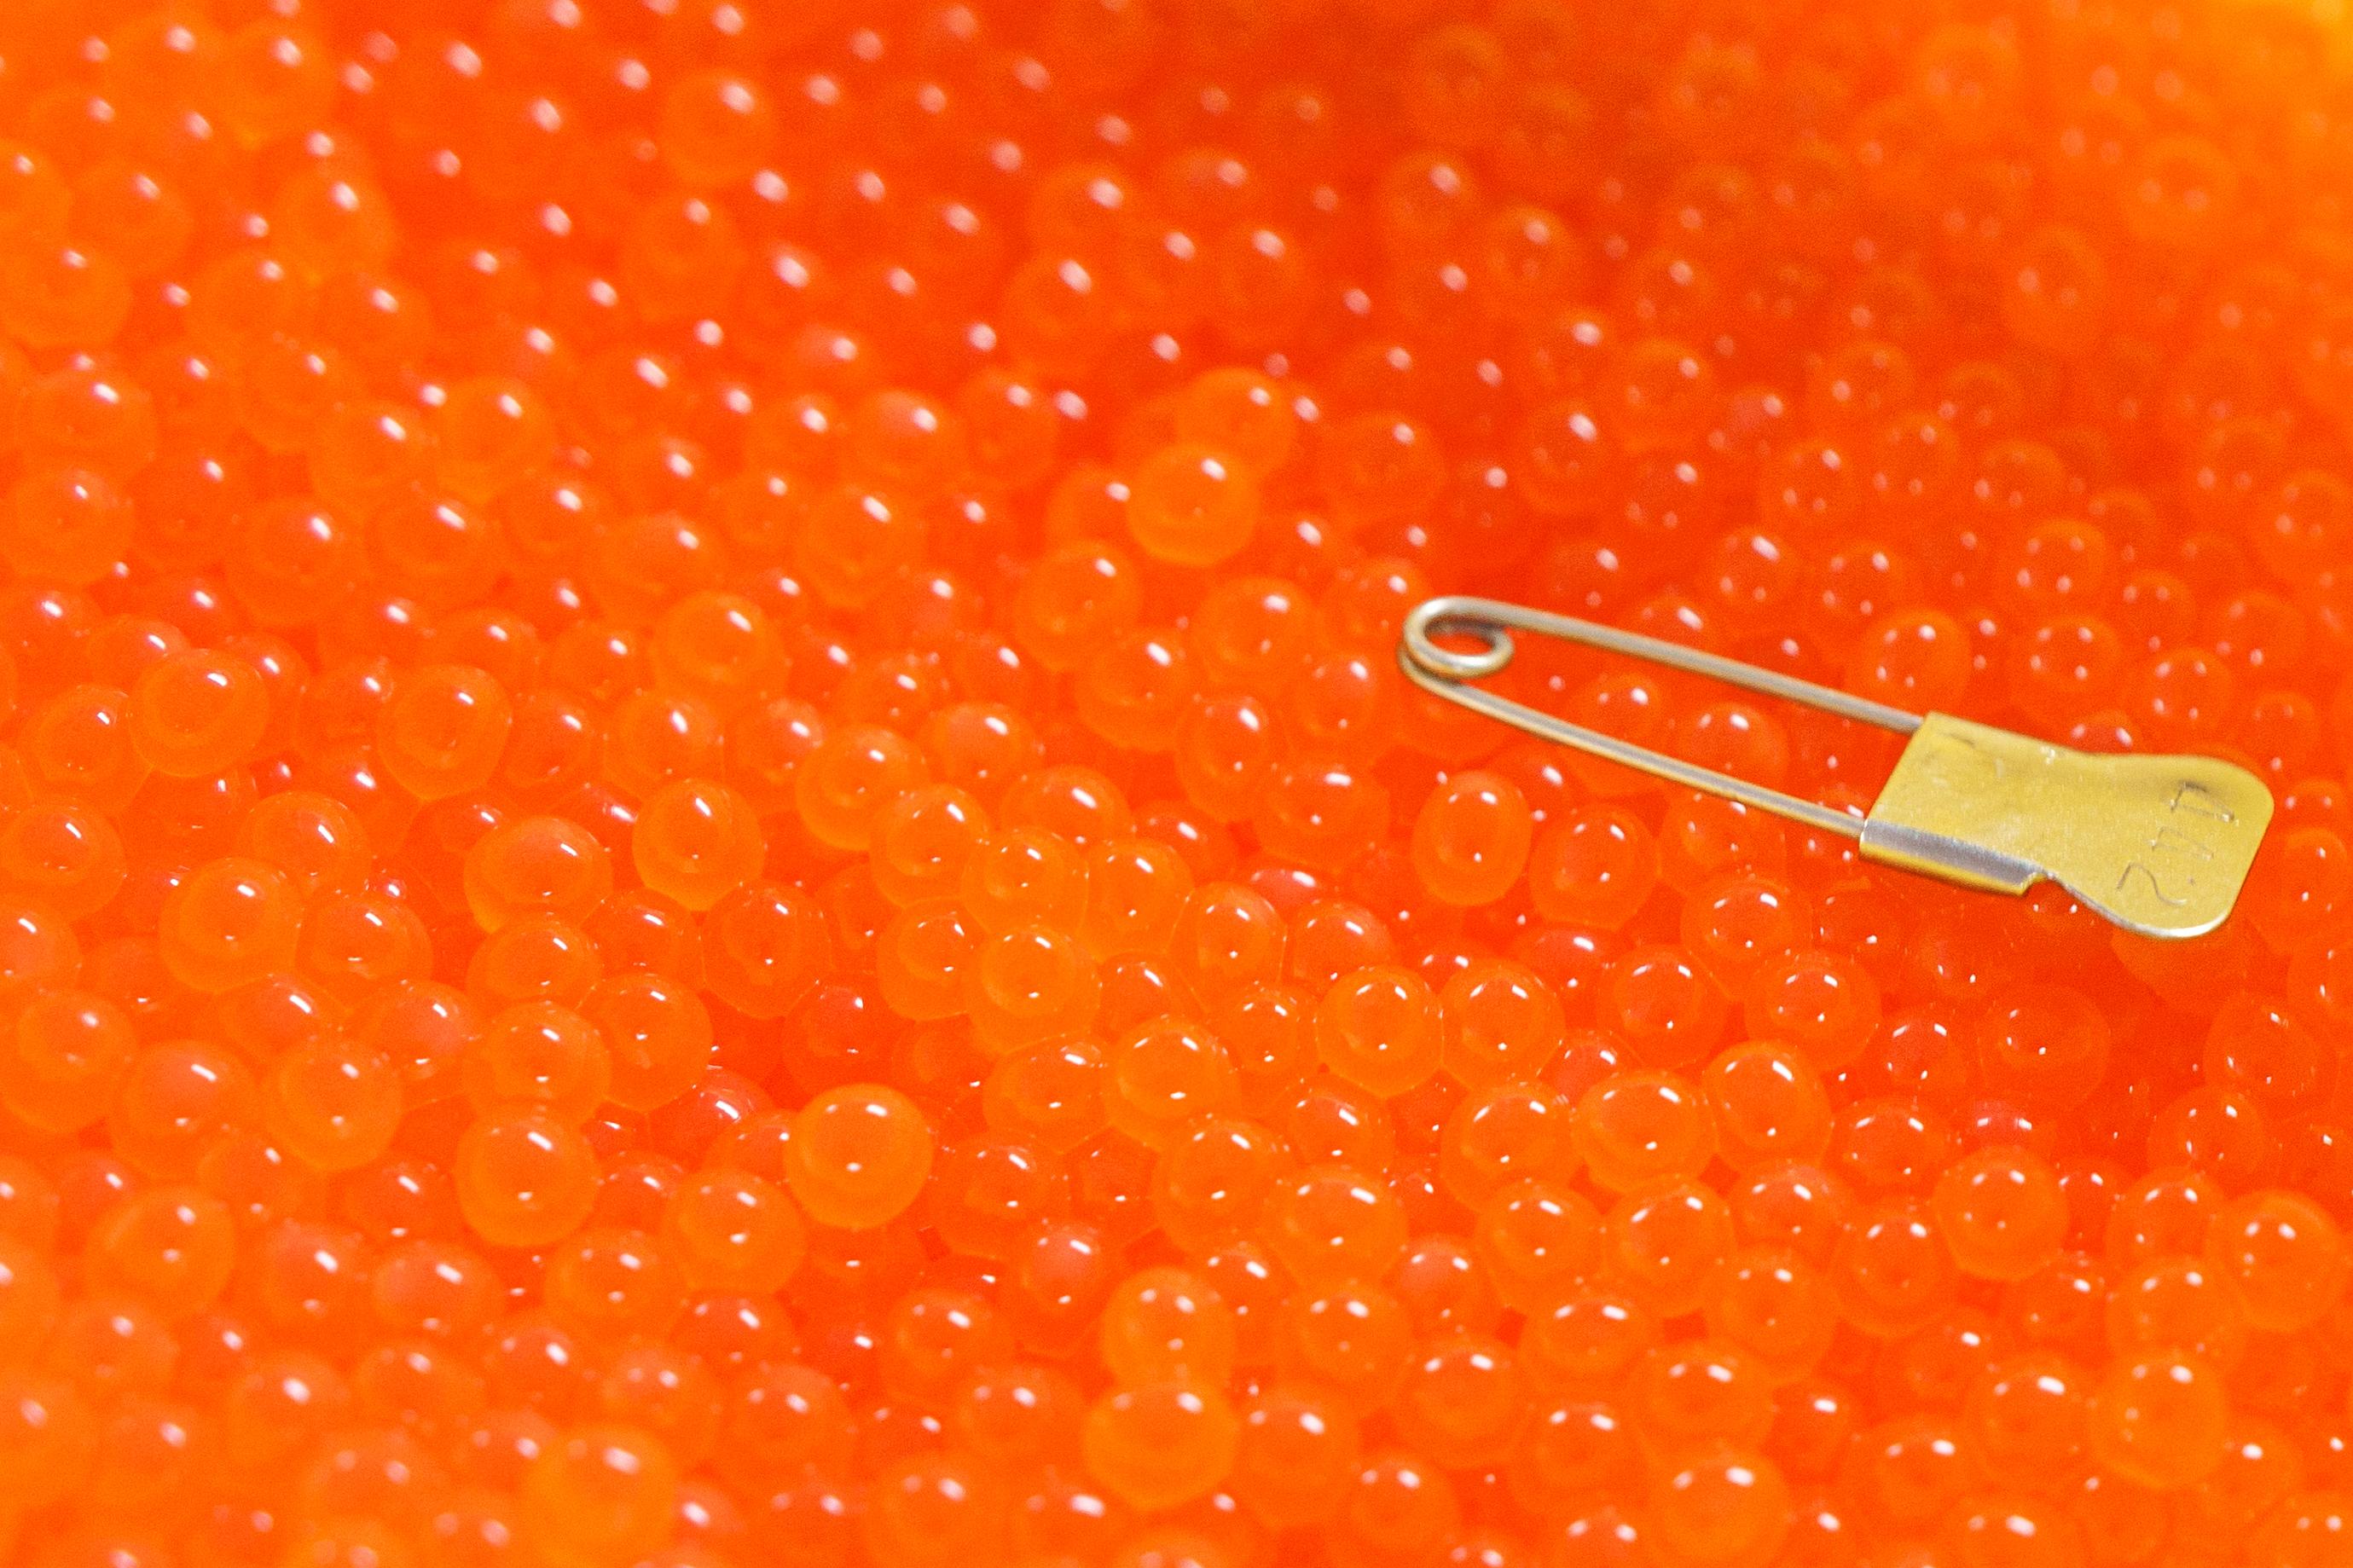 bright orange translucent salmon eggs fill the image with a paper clip with yellow tape laying on top of them